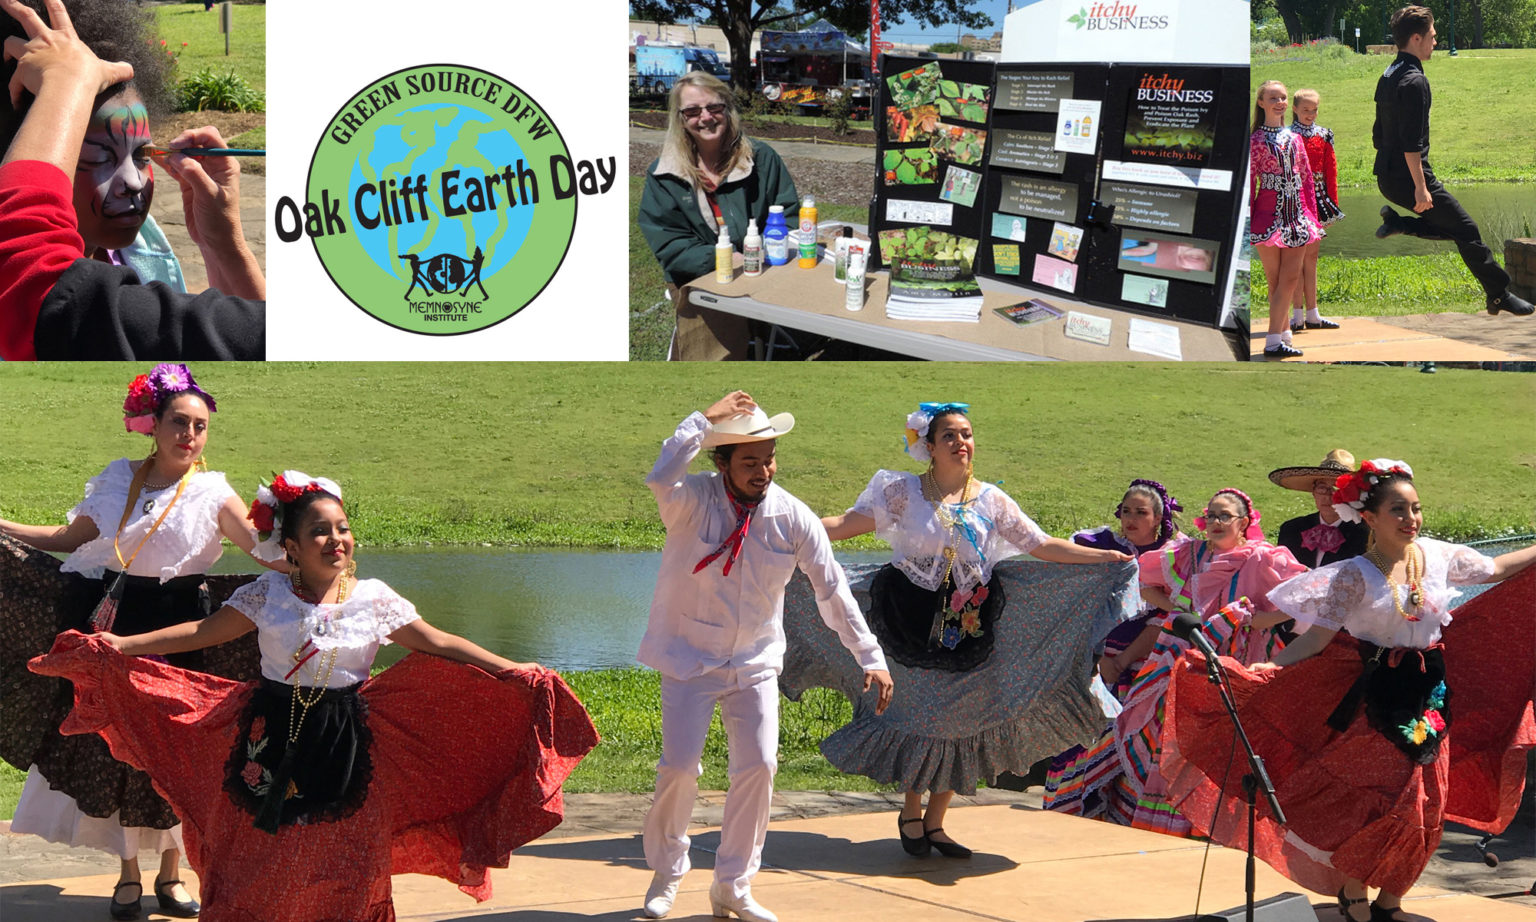 Oak Cliff Earth Day Annual community event celebrating nature, the